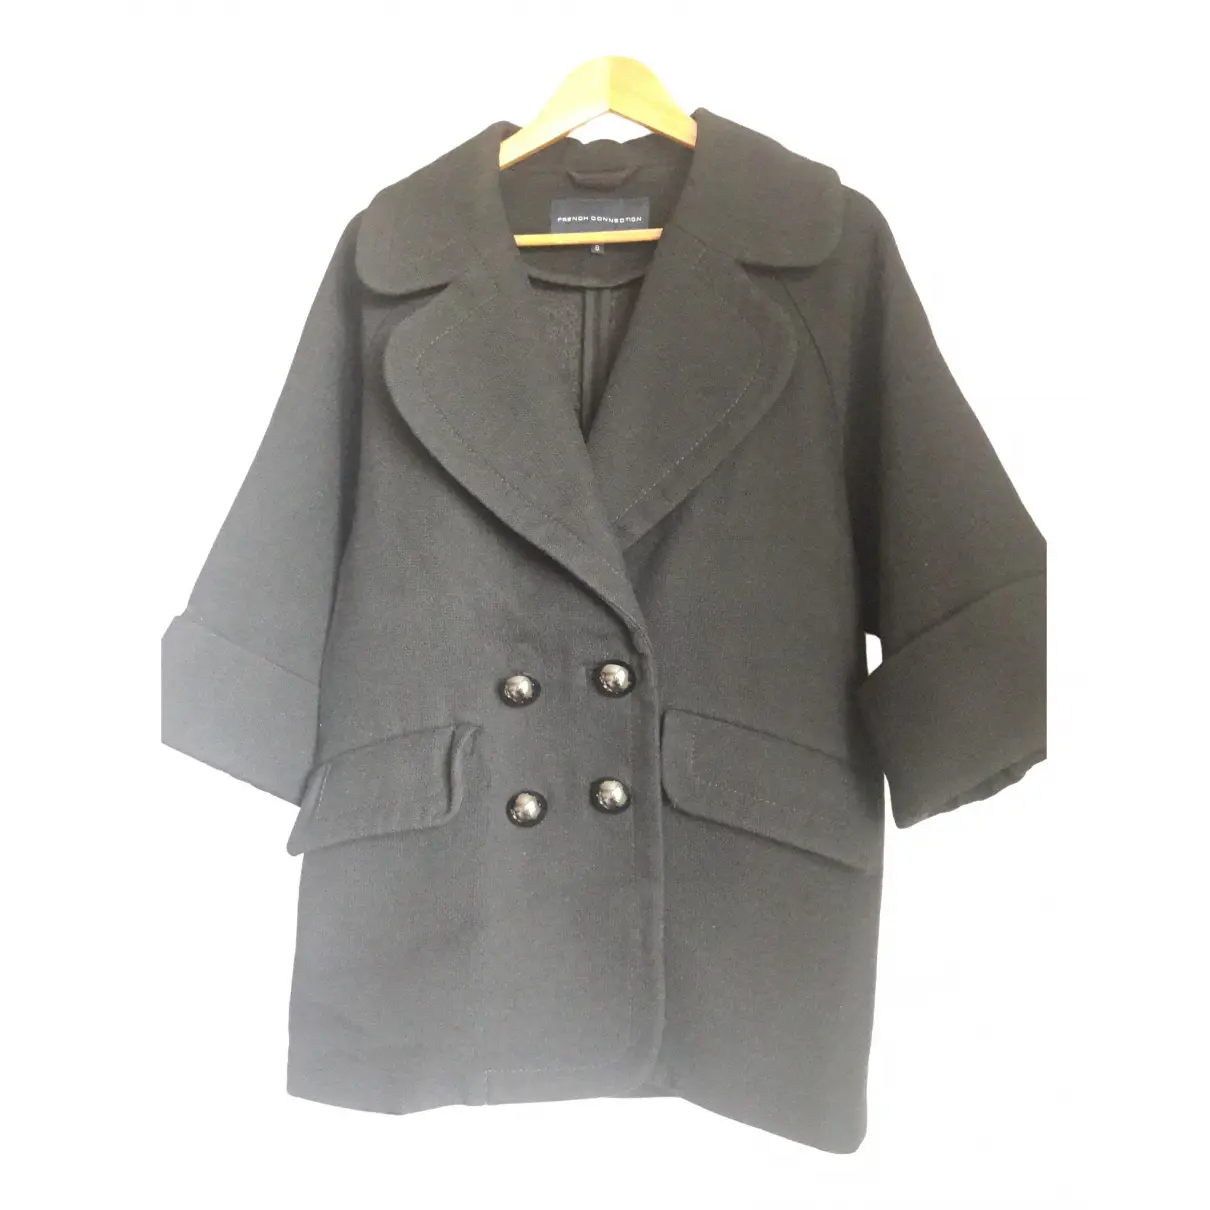 Wool peacoat French Connection